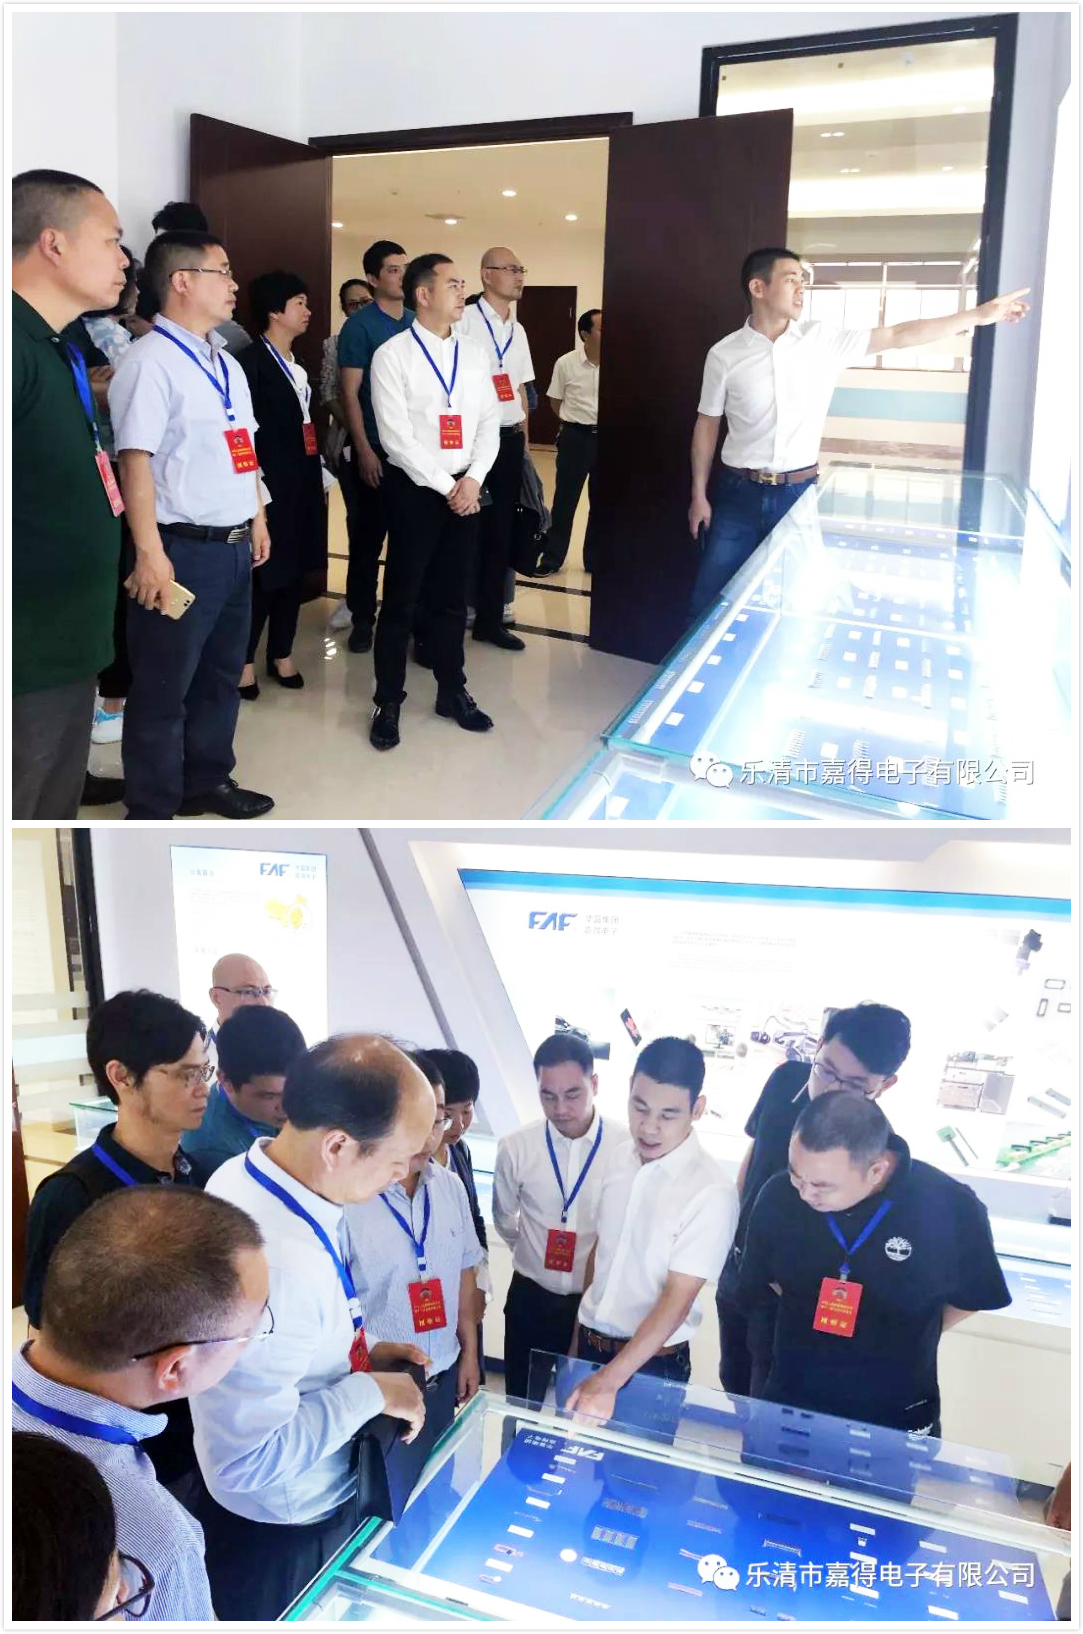 The leaders of relevant departments in Yueqing City investigate Yueqing Jiade